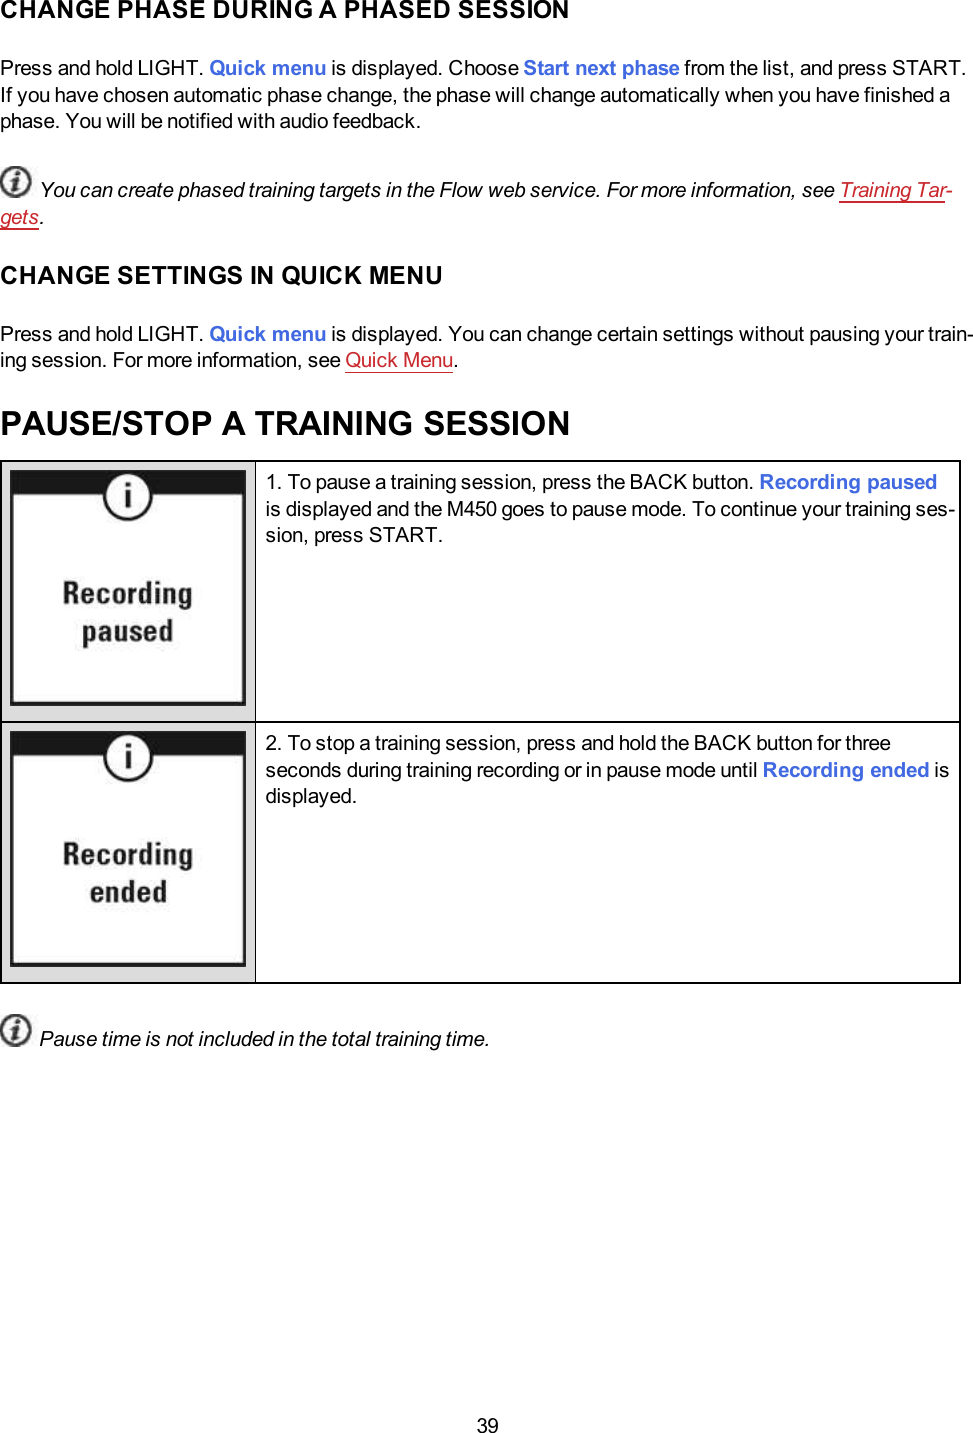 39CHANGE PHASE DURING A PHASED SESSIONPress and hold LIGHT. Quick menu is displayed. Choose Start next phase from the list, and press START.If you have chosen automatic phase change, the phase will change automatically when you have finished aphase. You will be notified with audio feedback.You can create phased training targets in the Flow web service. For more information, see Training Tar-gets.CHANGE SETTINGS IN QUICK MENUPress and hold LIGHT. Quick menu is displayed. You can change certain settings without pausing your train-ing session. For more information, see Quick Menu.PAUSE/STOP A TRAINING SESSION1. To pause a training session, press the BACK button. Recording pausedis displayed and the M450 goes to pause mode. To continue your training ses-sion, press START.2. To stop a training session, press and hold the BACK button for threeseconds during training recording or in pause mode until Recording ended isdisplayed.Pause time is not included in the total training time.